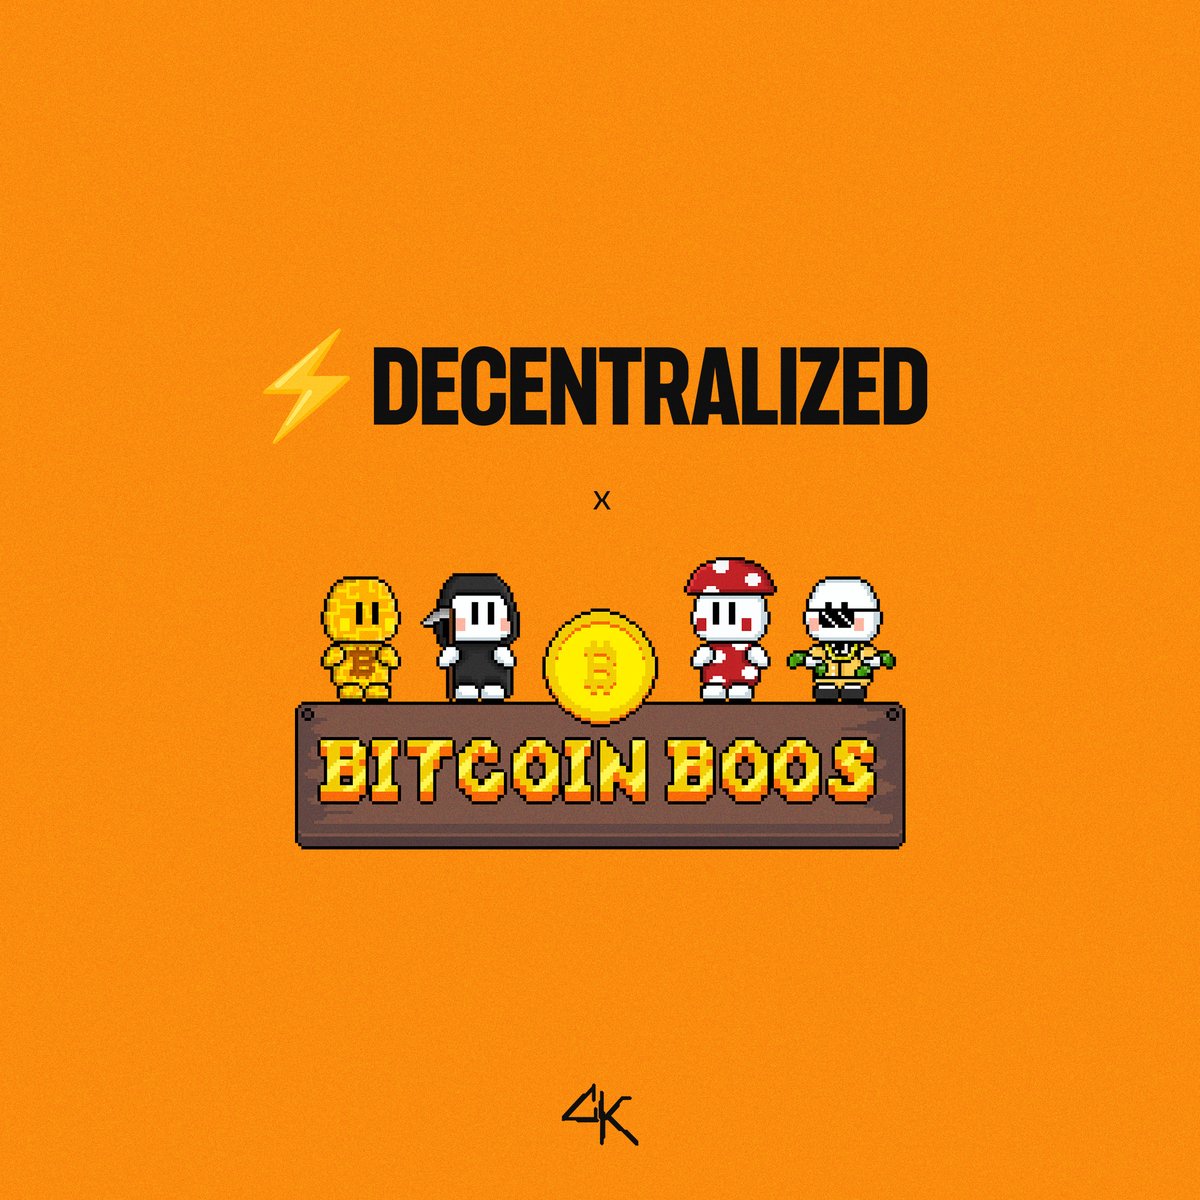 Welcome to ⚡️DECENTRALIZED, @BitcoinBoos.